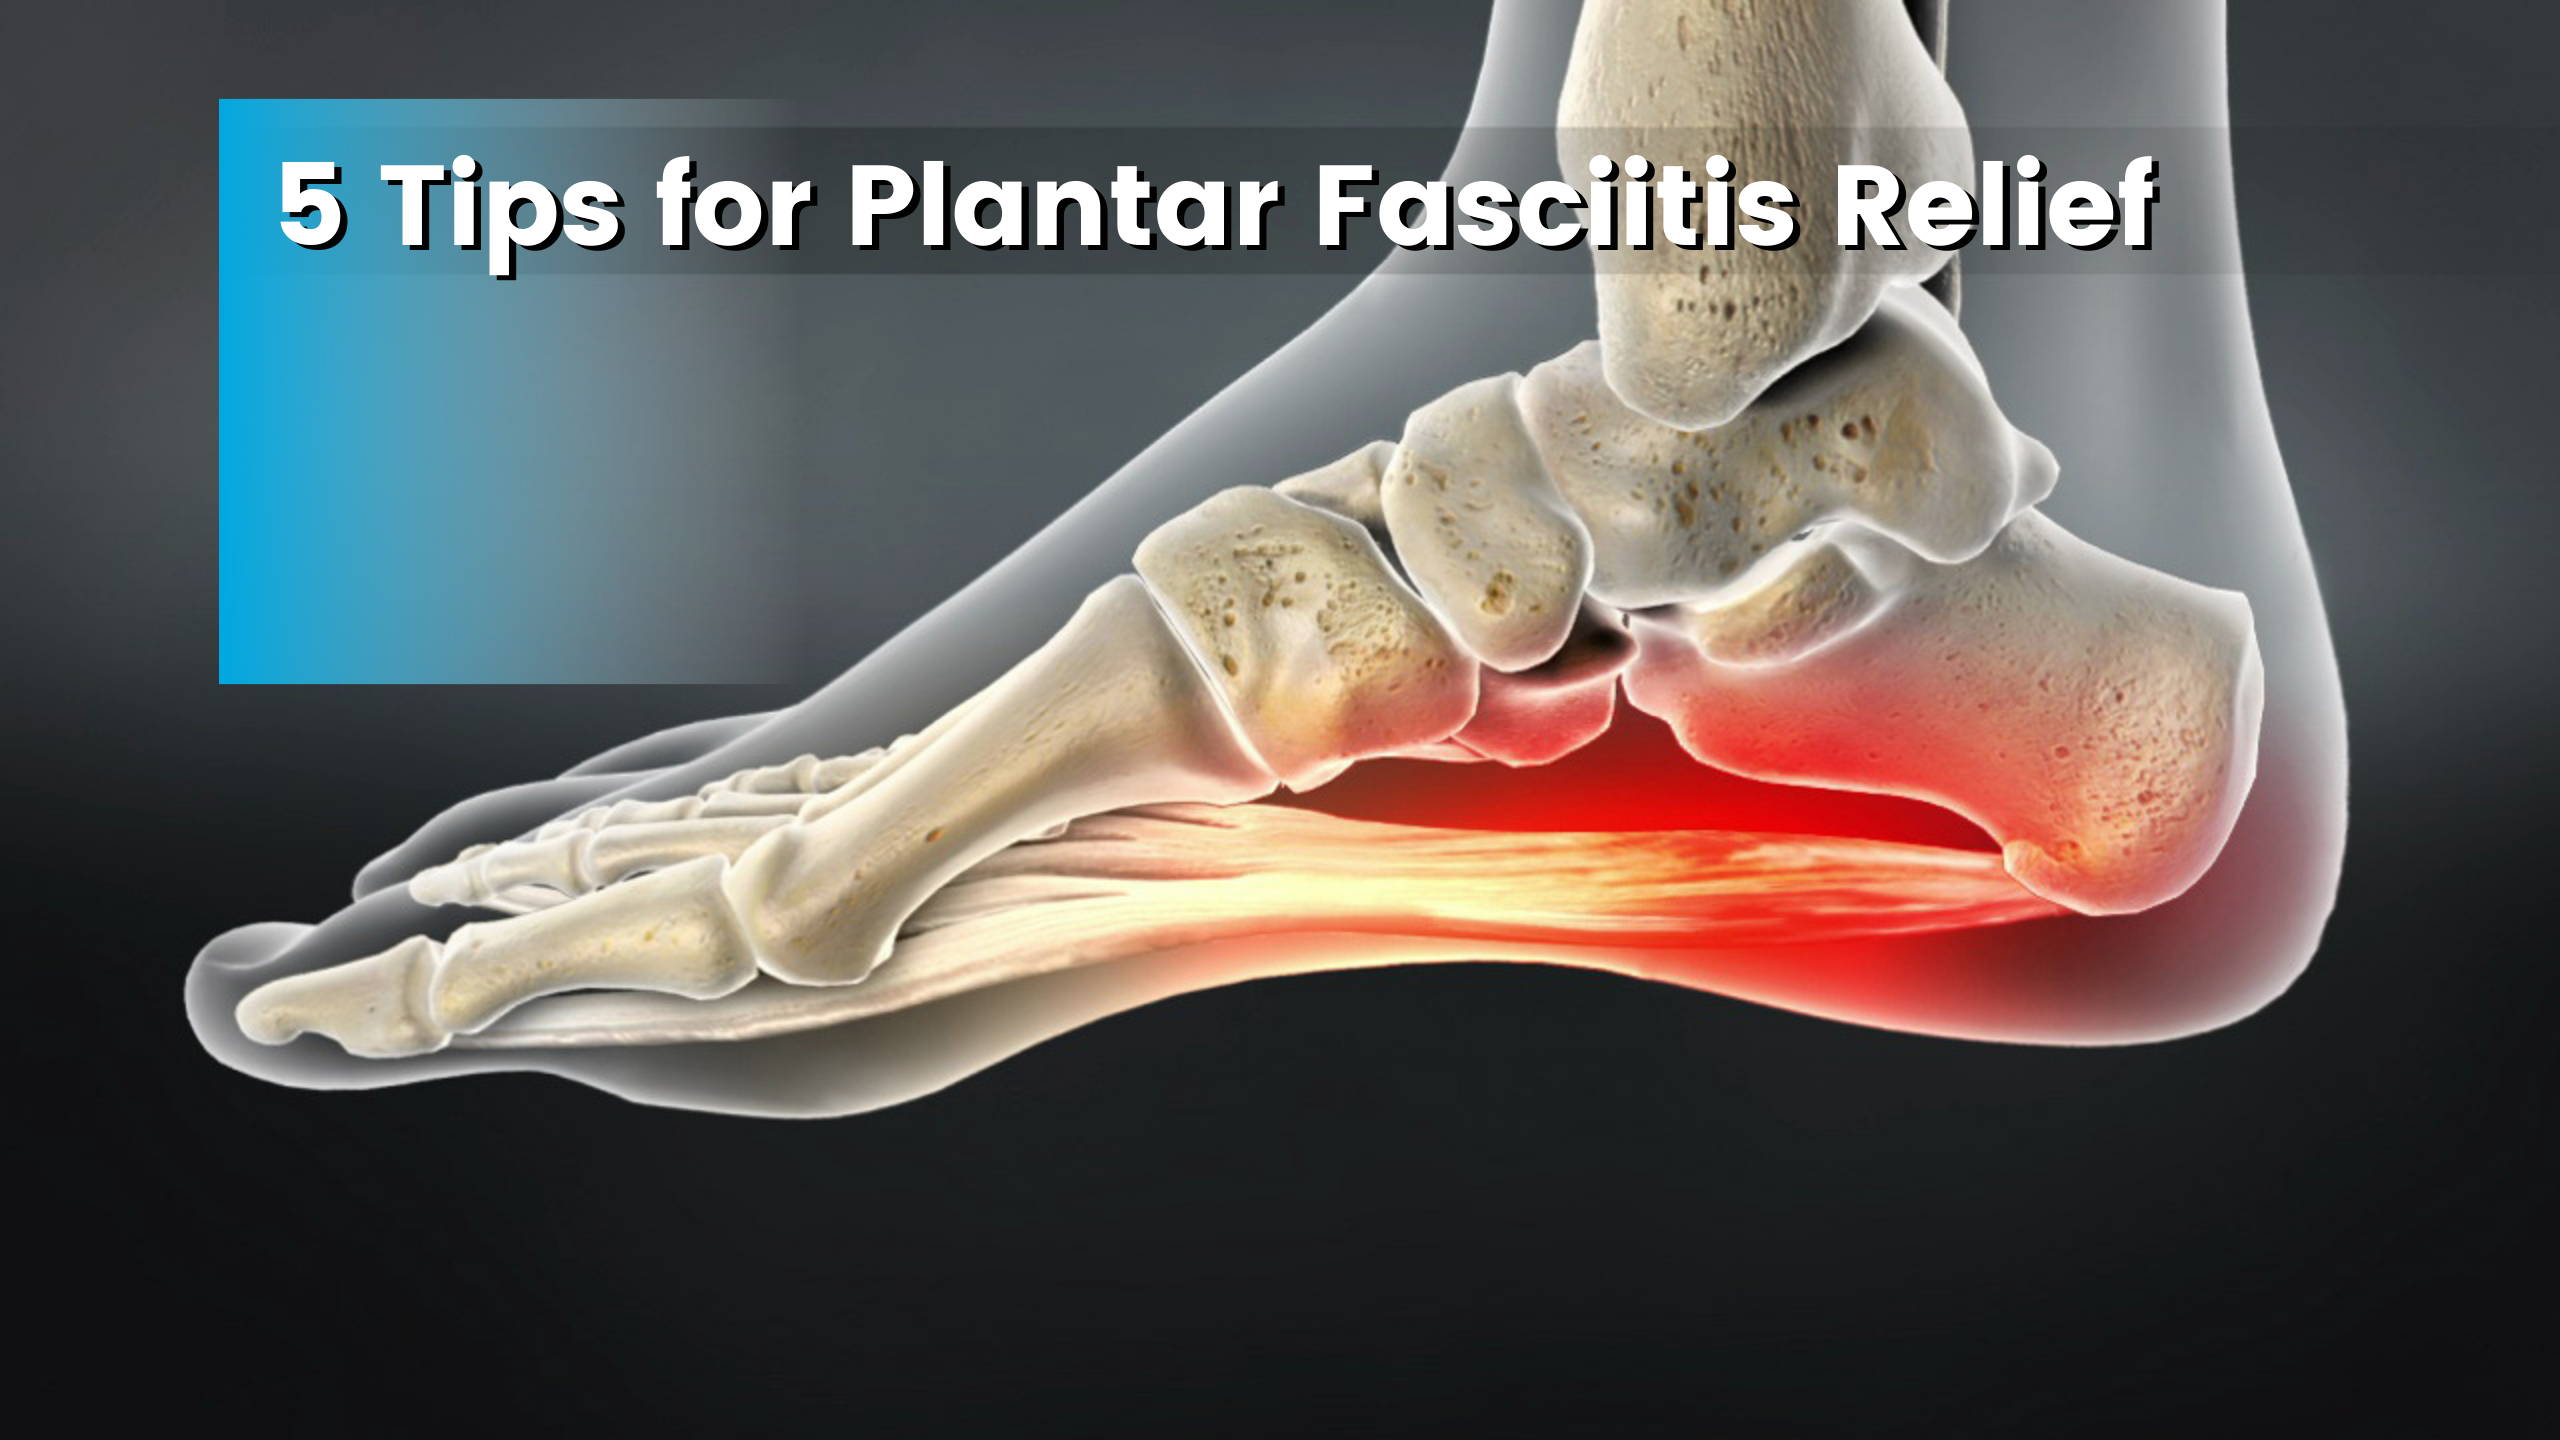 Plantar fasciitis is an inflammation of the fibrous tissue (plantar fascia) along the bottom of your foot that connects your heel bone to your toes.